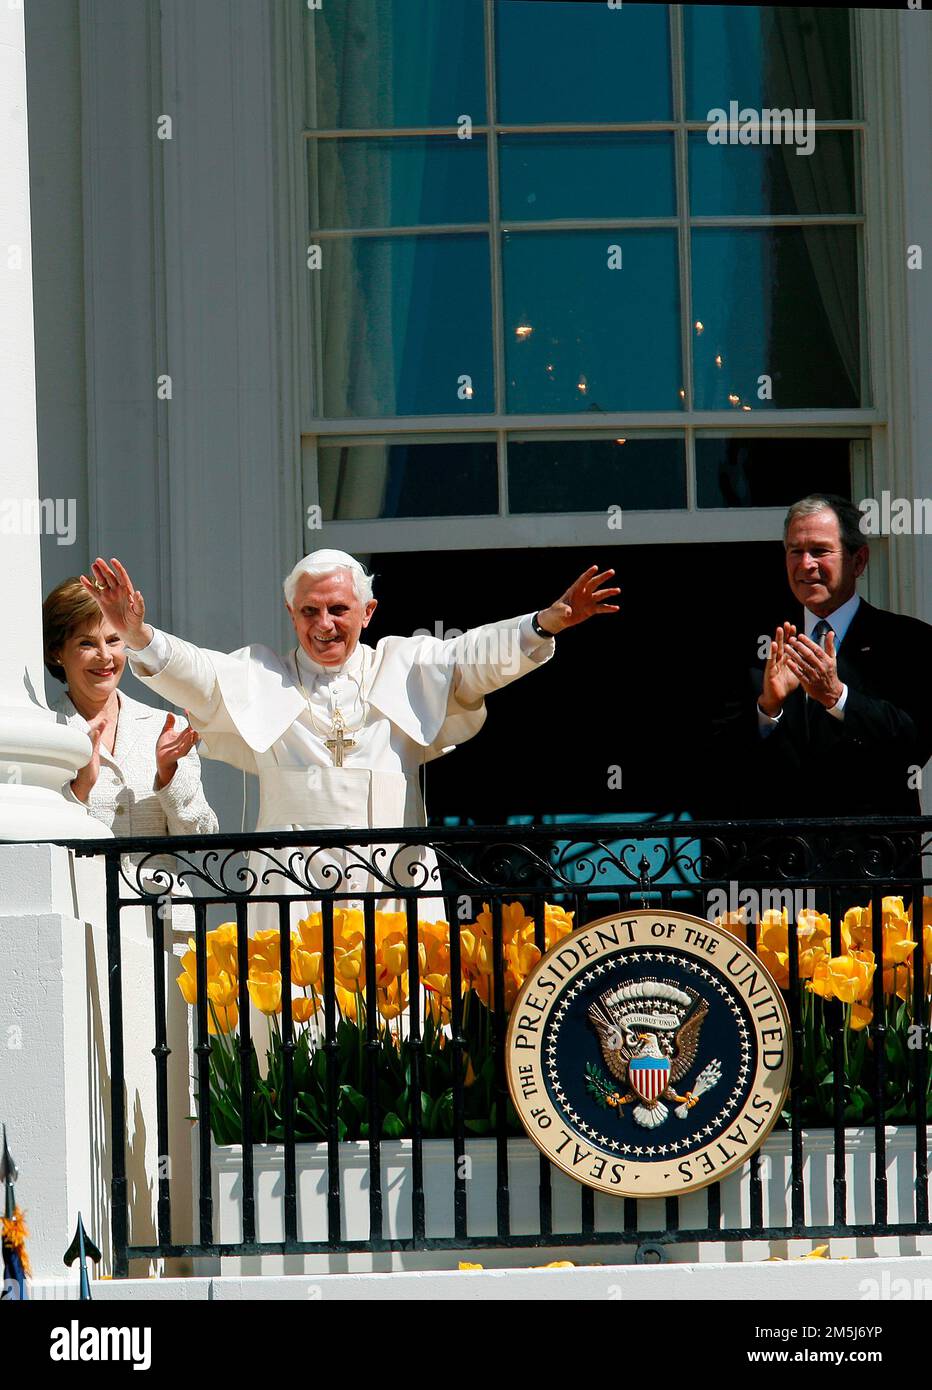 Pope Benedict XVI, center, blesses the crowd from the Blue Room Balcony at the end of the Arrival Ceremony in his honor hosted by United States President George W. Bush, right and first lady Laura Bush, left, on the South Lawn of the White House, Washington DC April 16, 2008.. Credit: Aude Guerrucci / Pool via CNP / MediaPunch Stock Photo